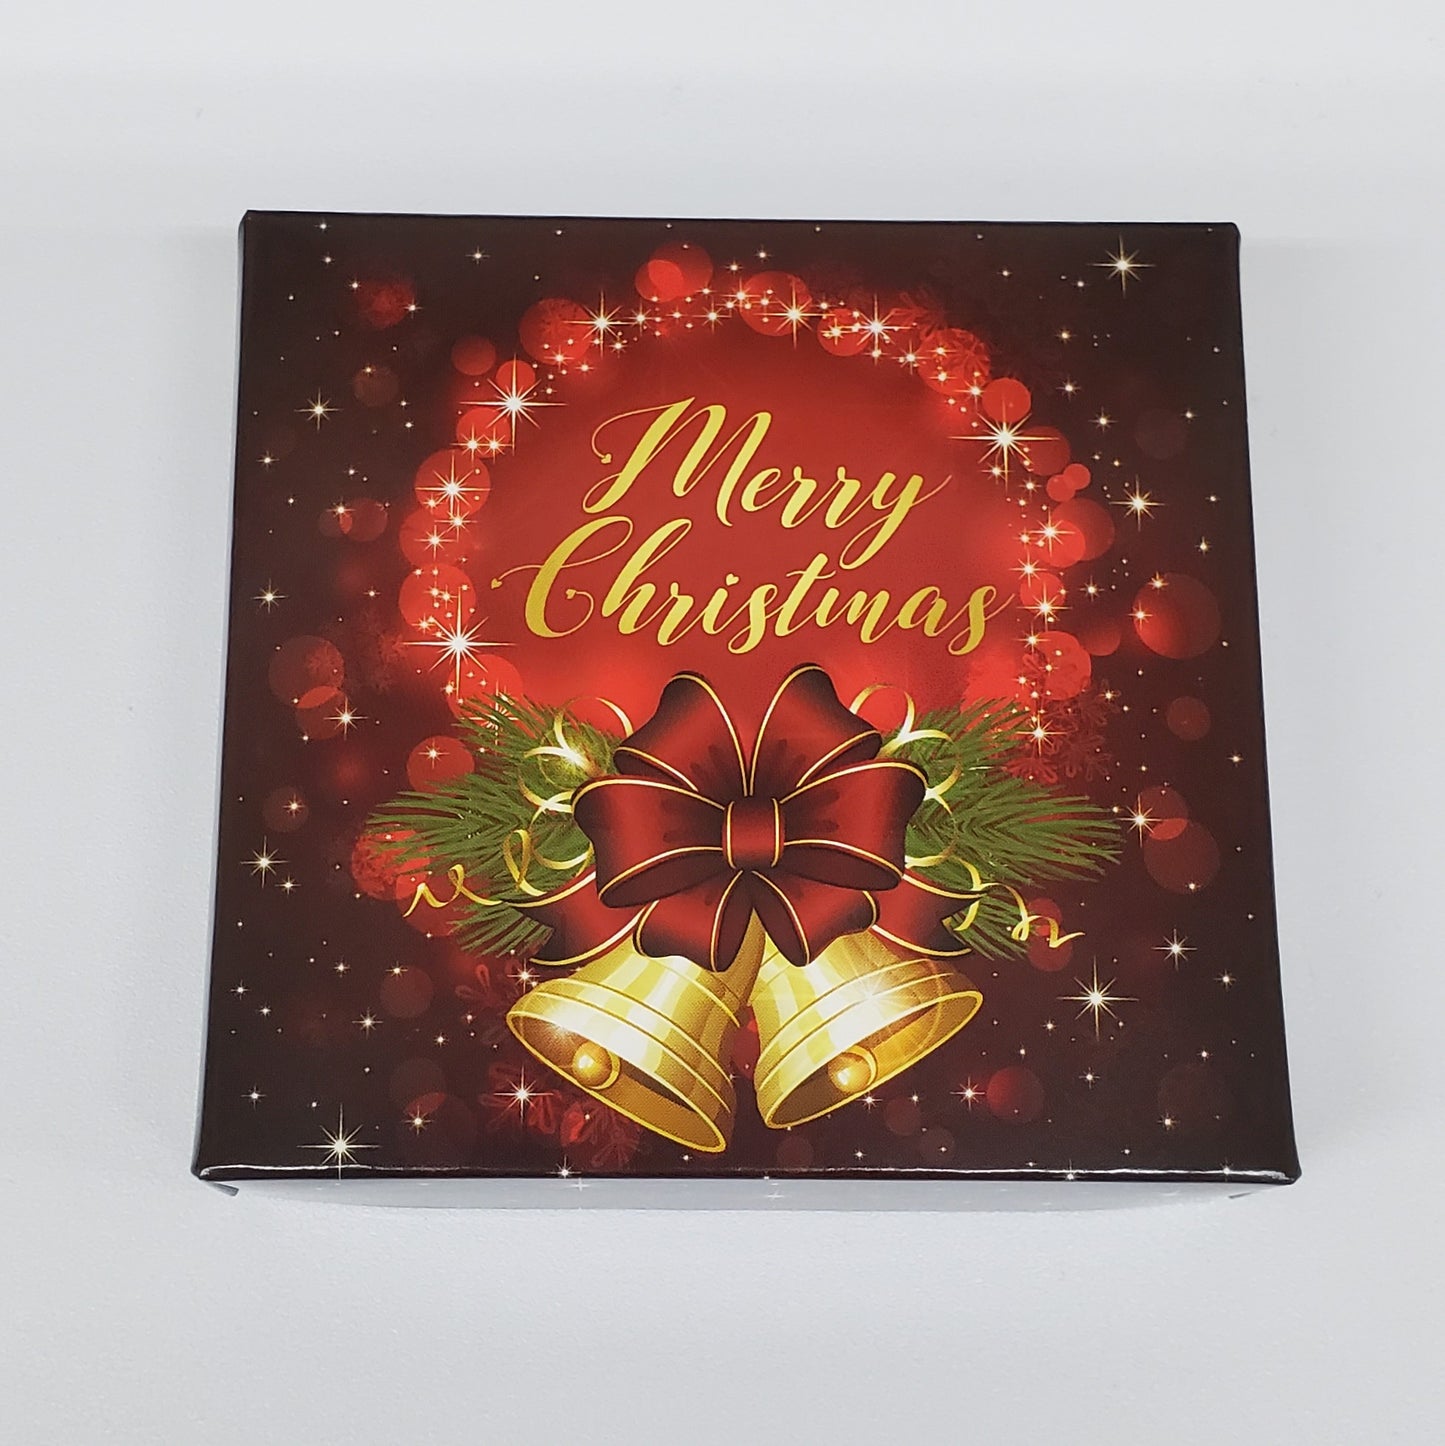 Christmas Bells Themed Box Cover for 9 Piece Holiday Assortment